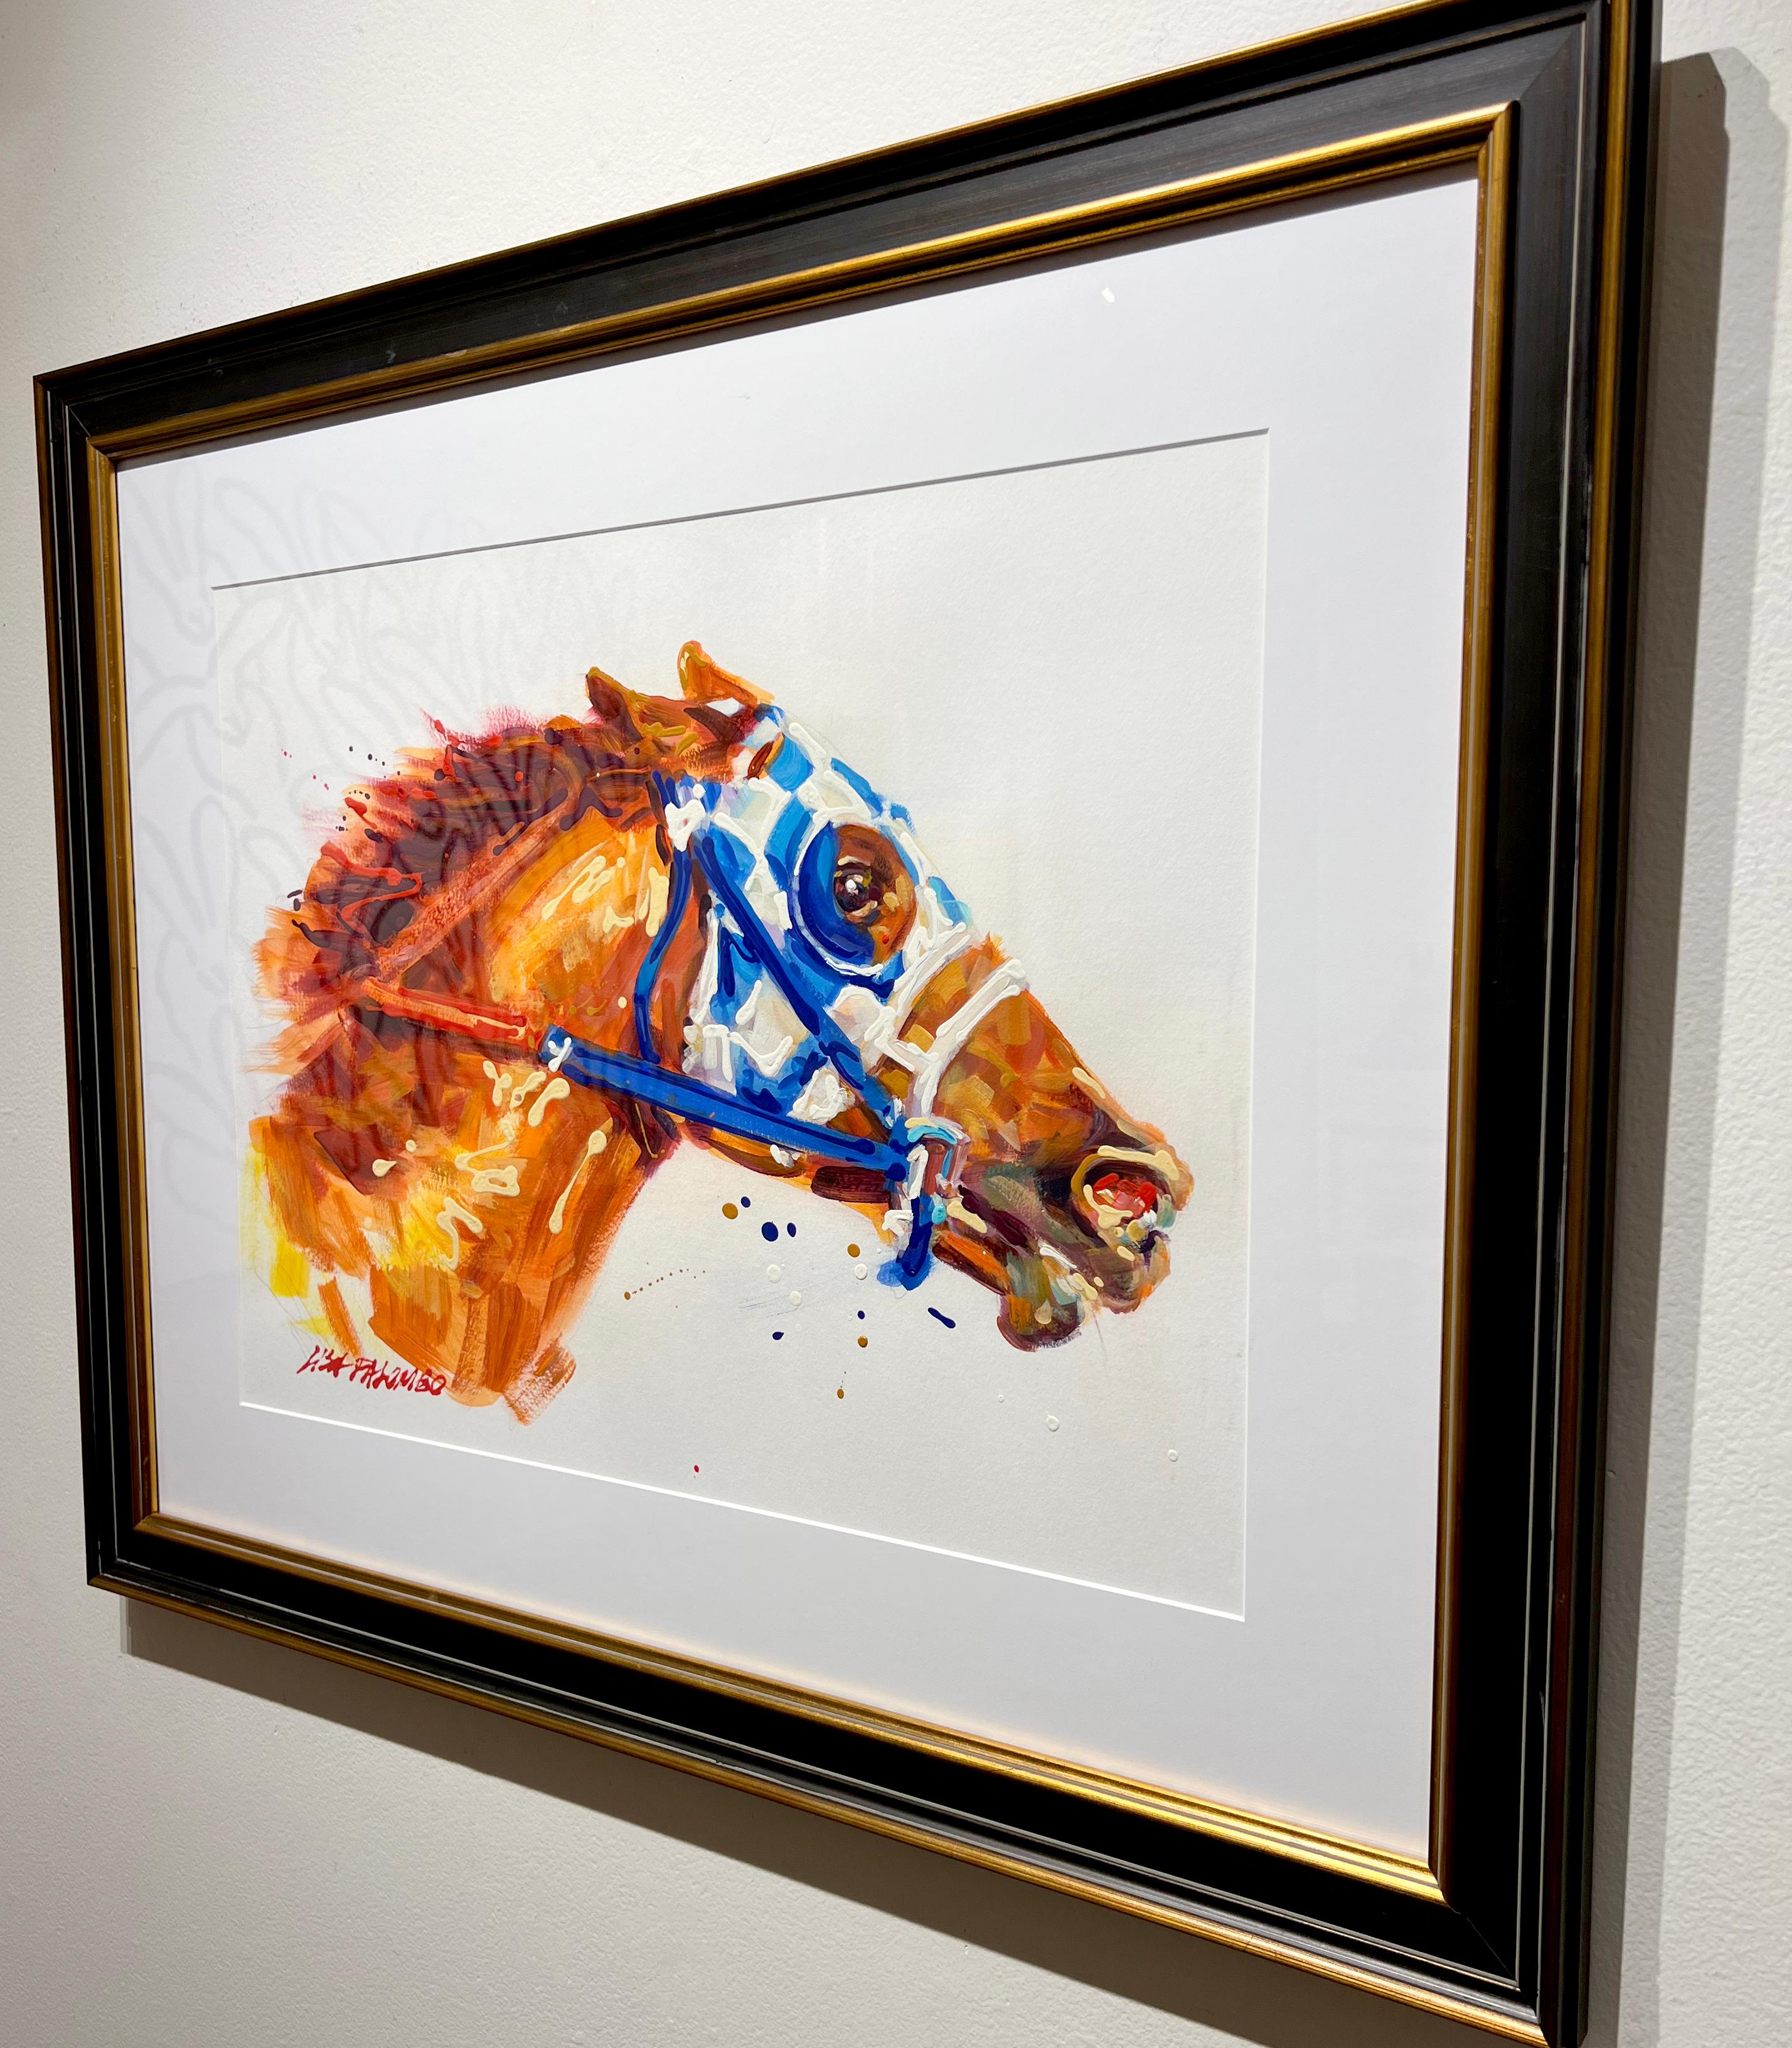 This bold and majestic equine impressionist painting, 